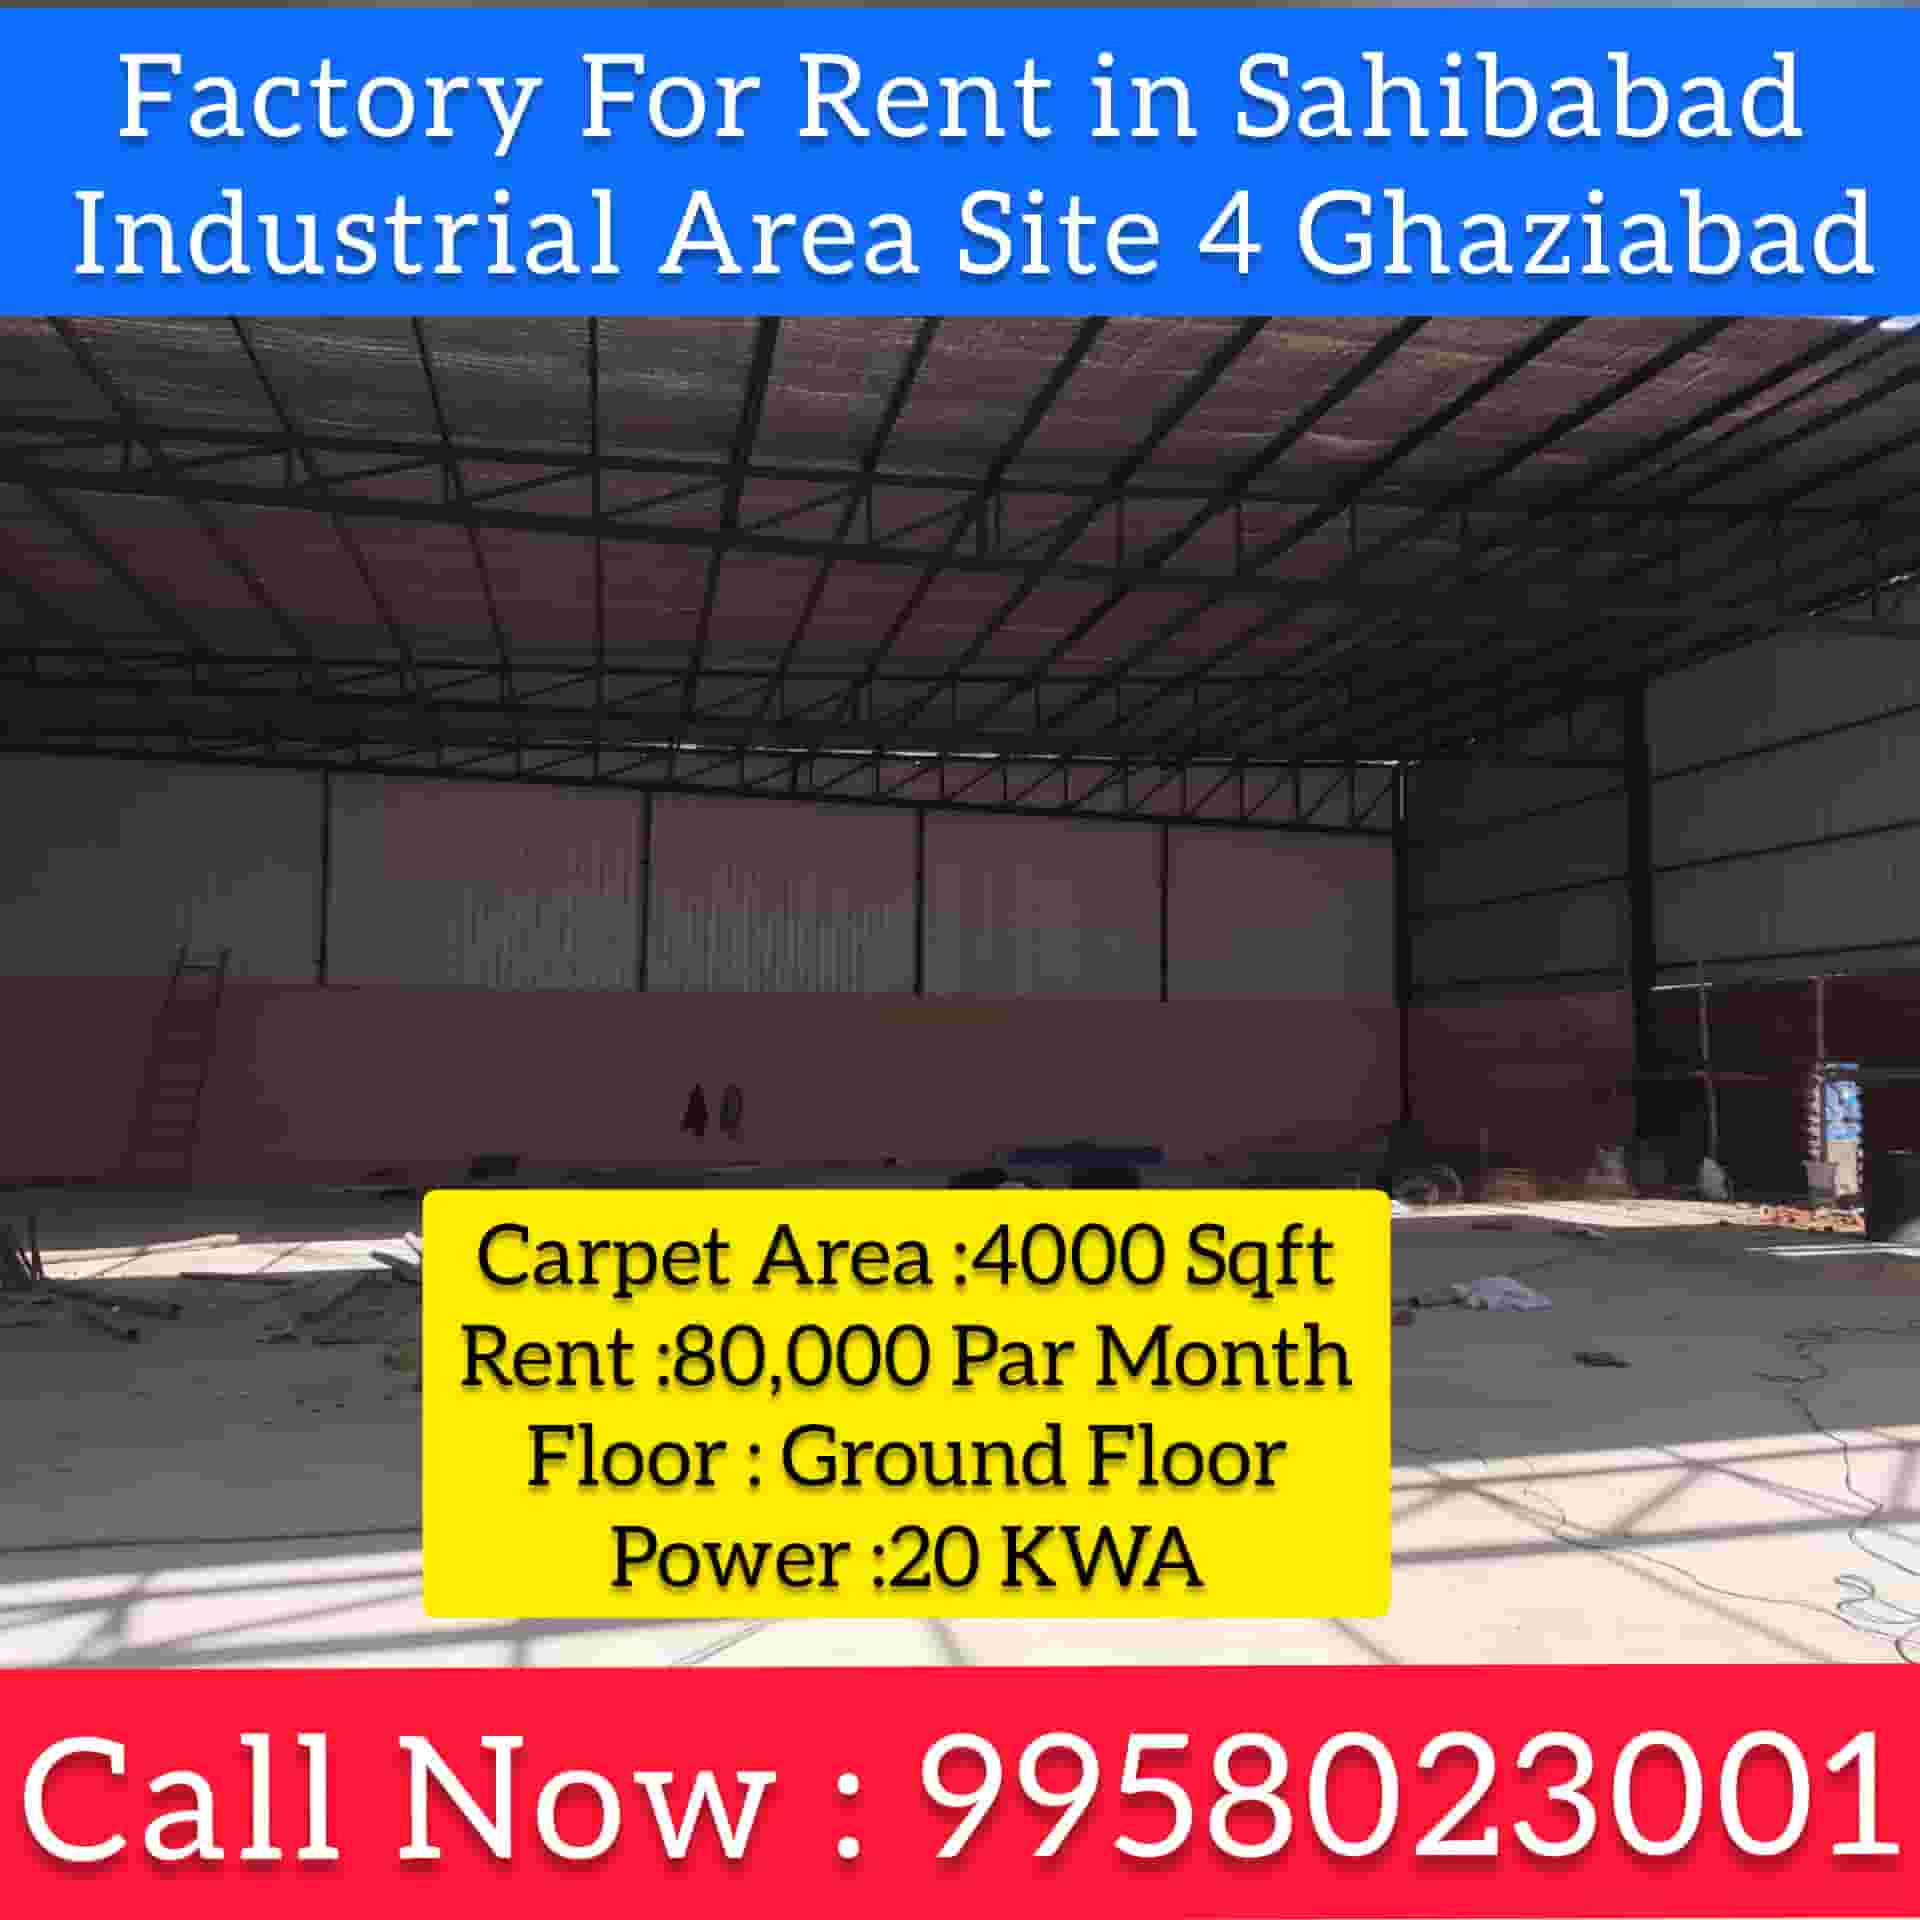 factory for Rent in Sahibabad Industrial Area